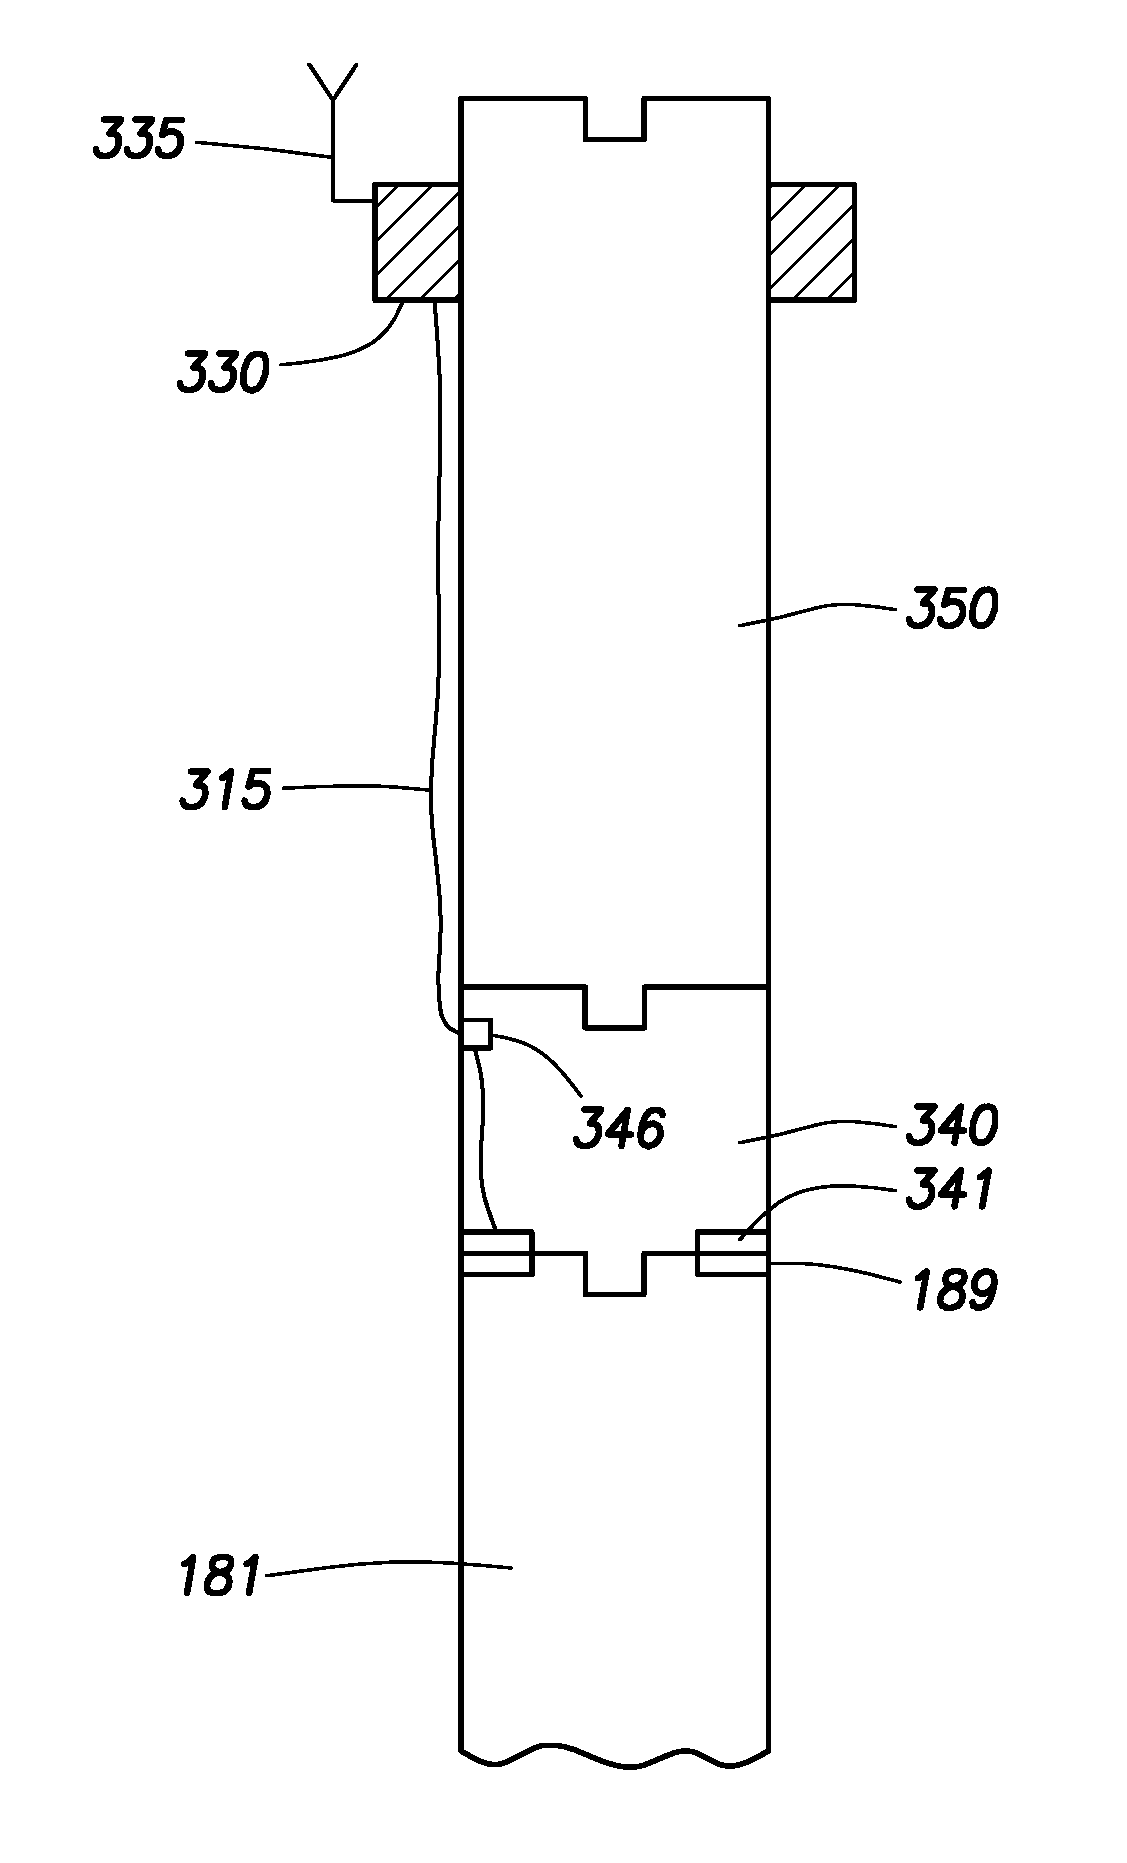 Surface communication apparatus and method for use with drill string telemetry